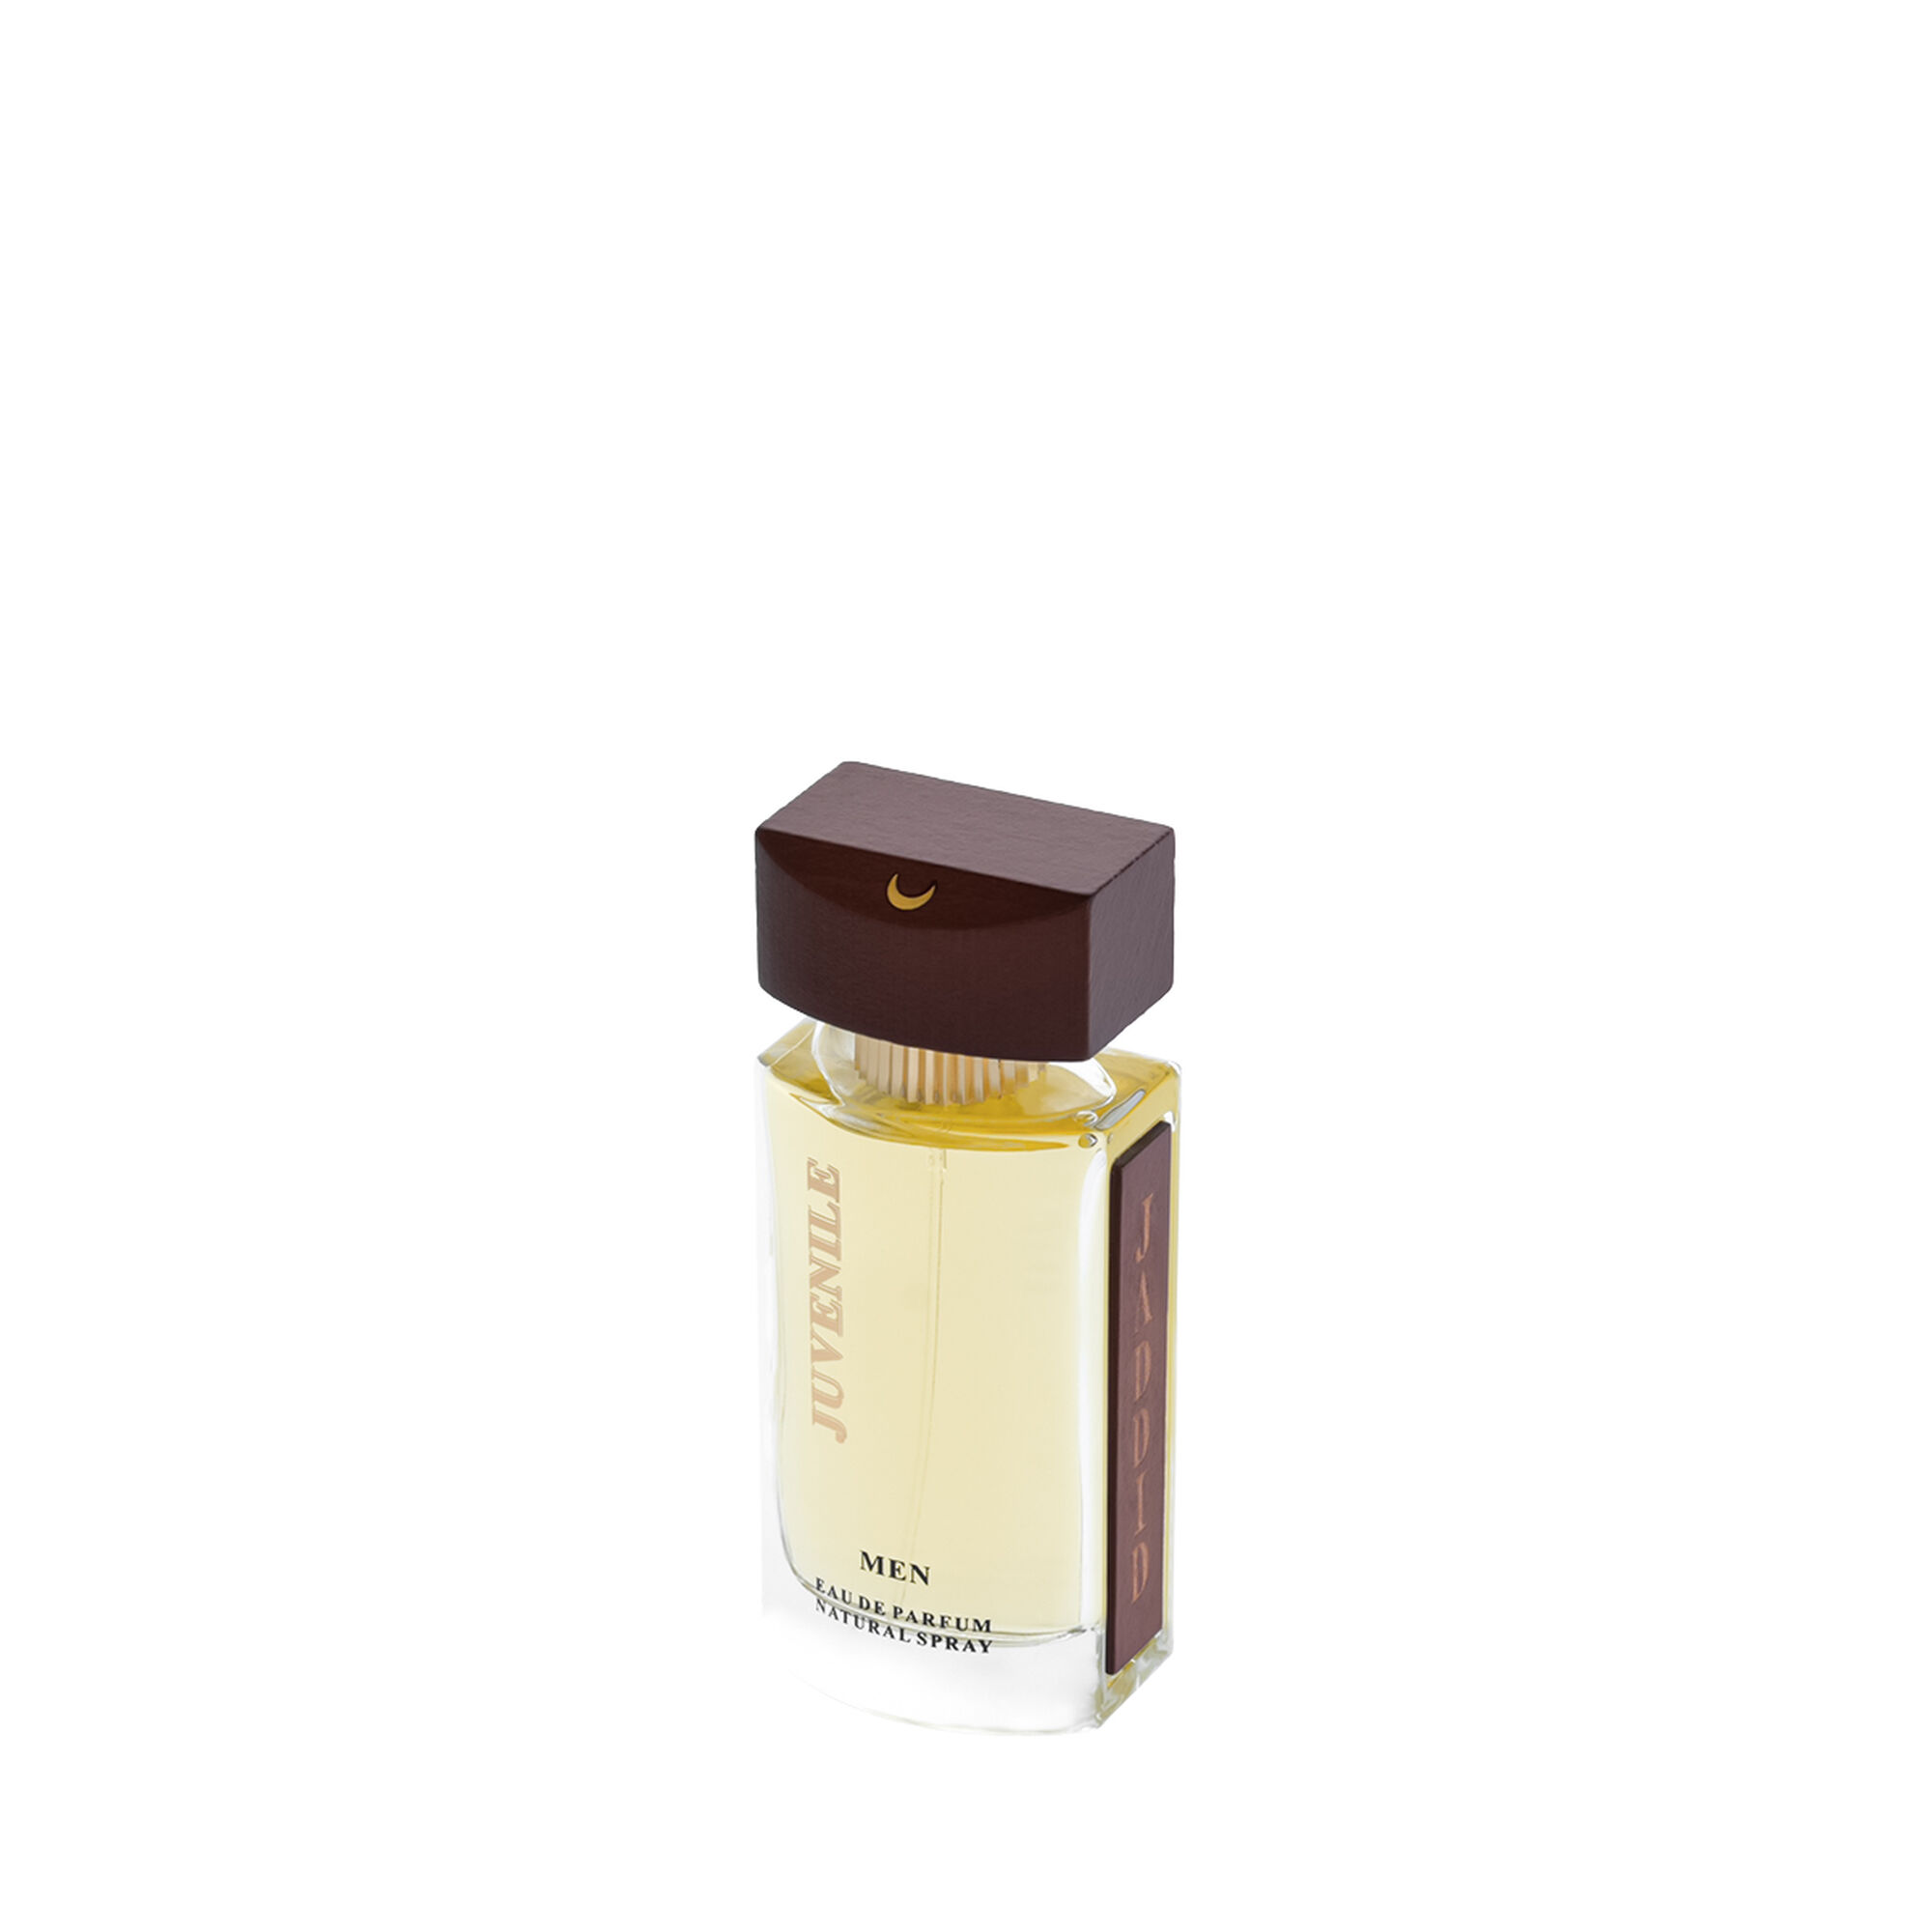 Juvenile Perfume by New 150ml